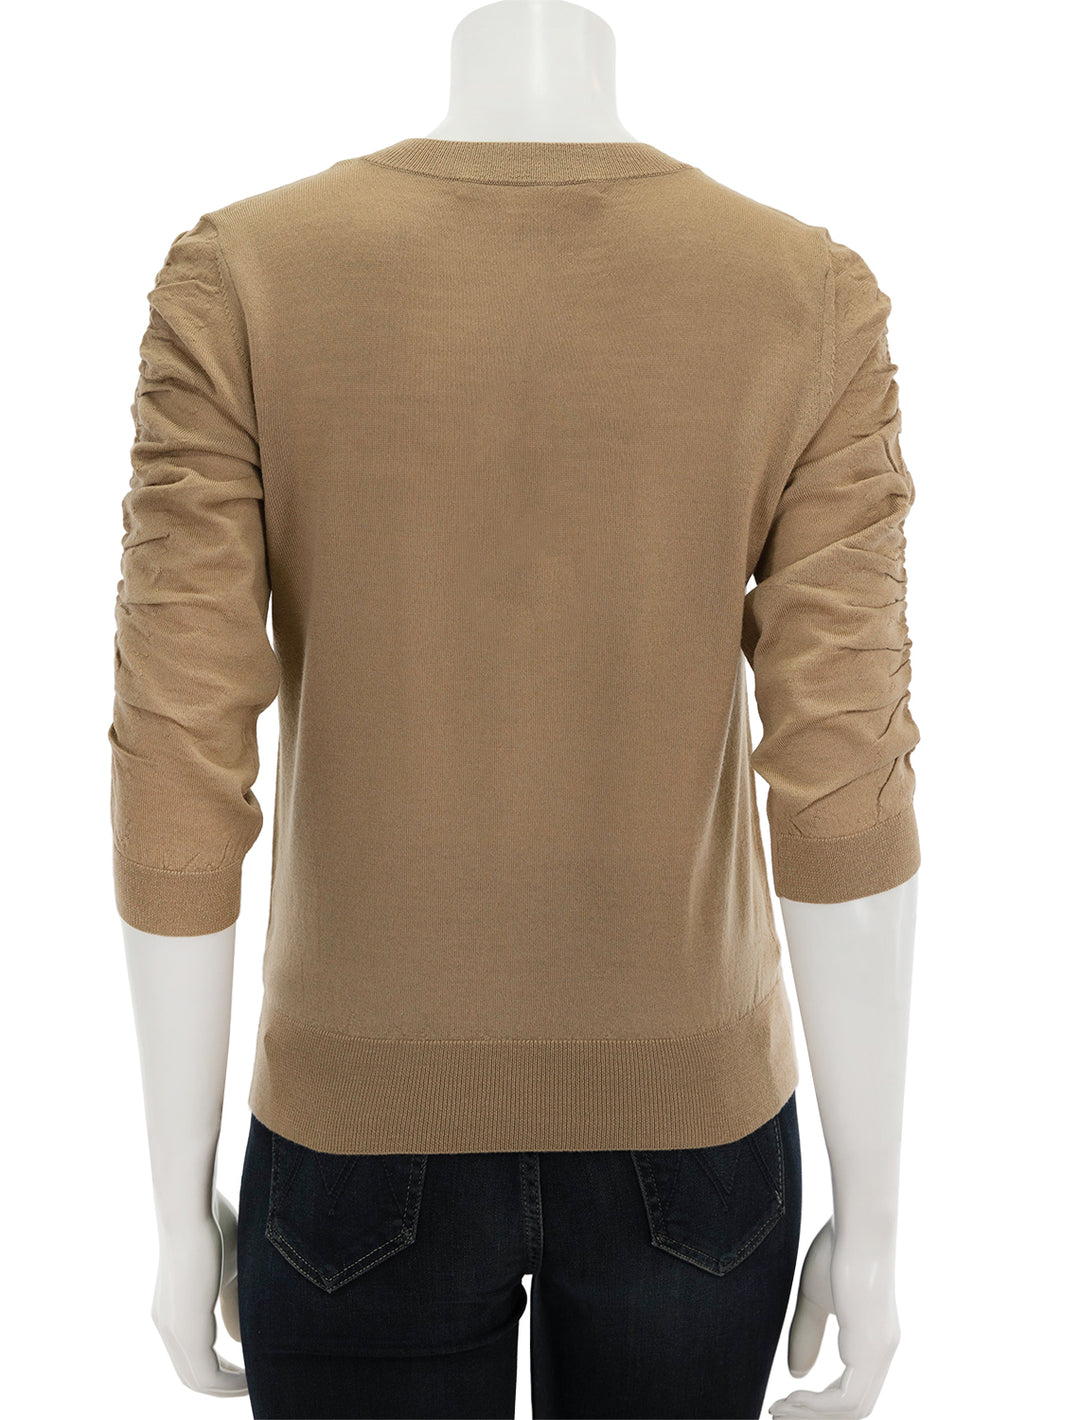 Back view of Veronica Beard's kase pullover in camel.